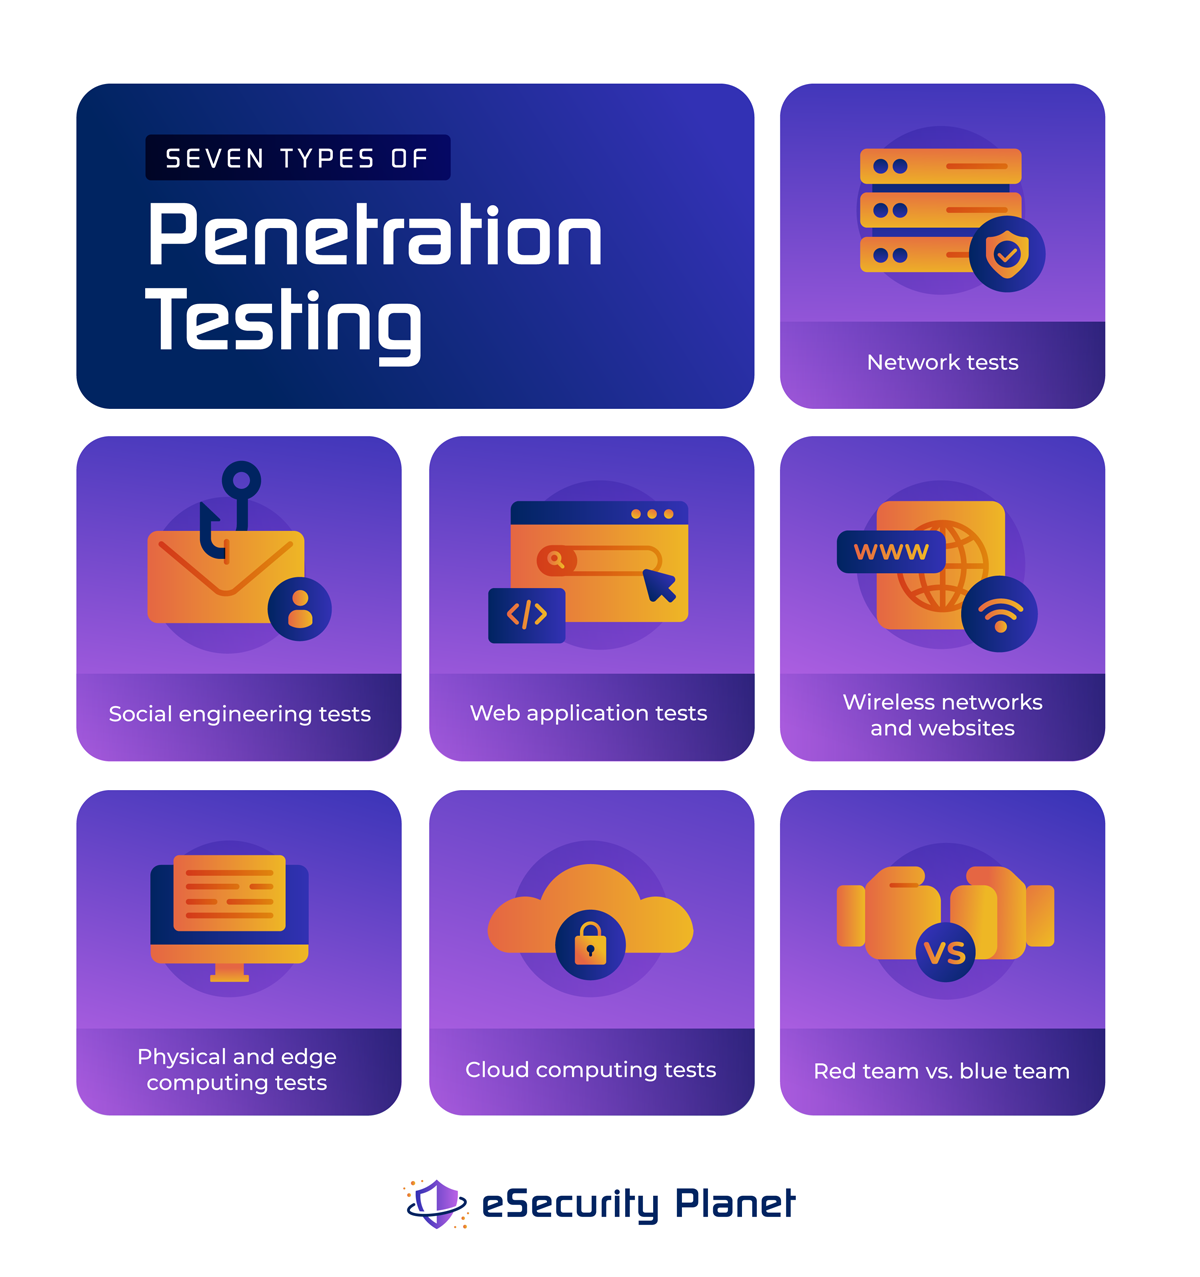 7 Types of Penetration Testing from eSecurity Planet.